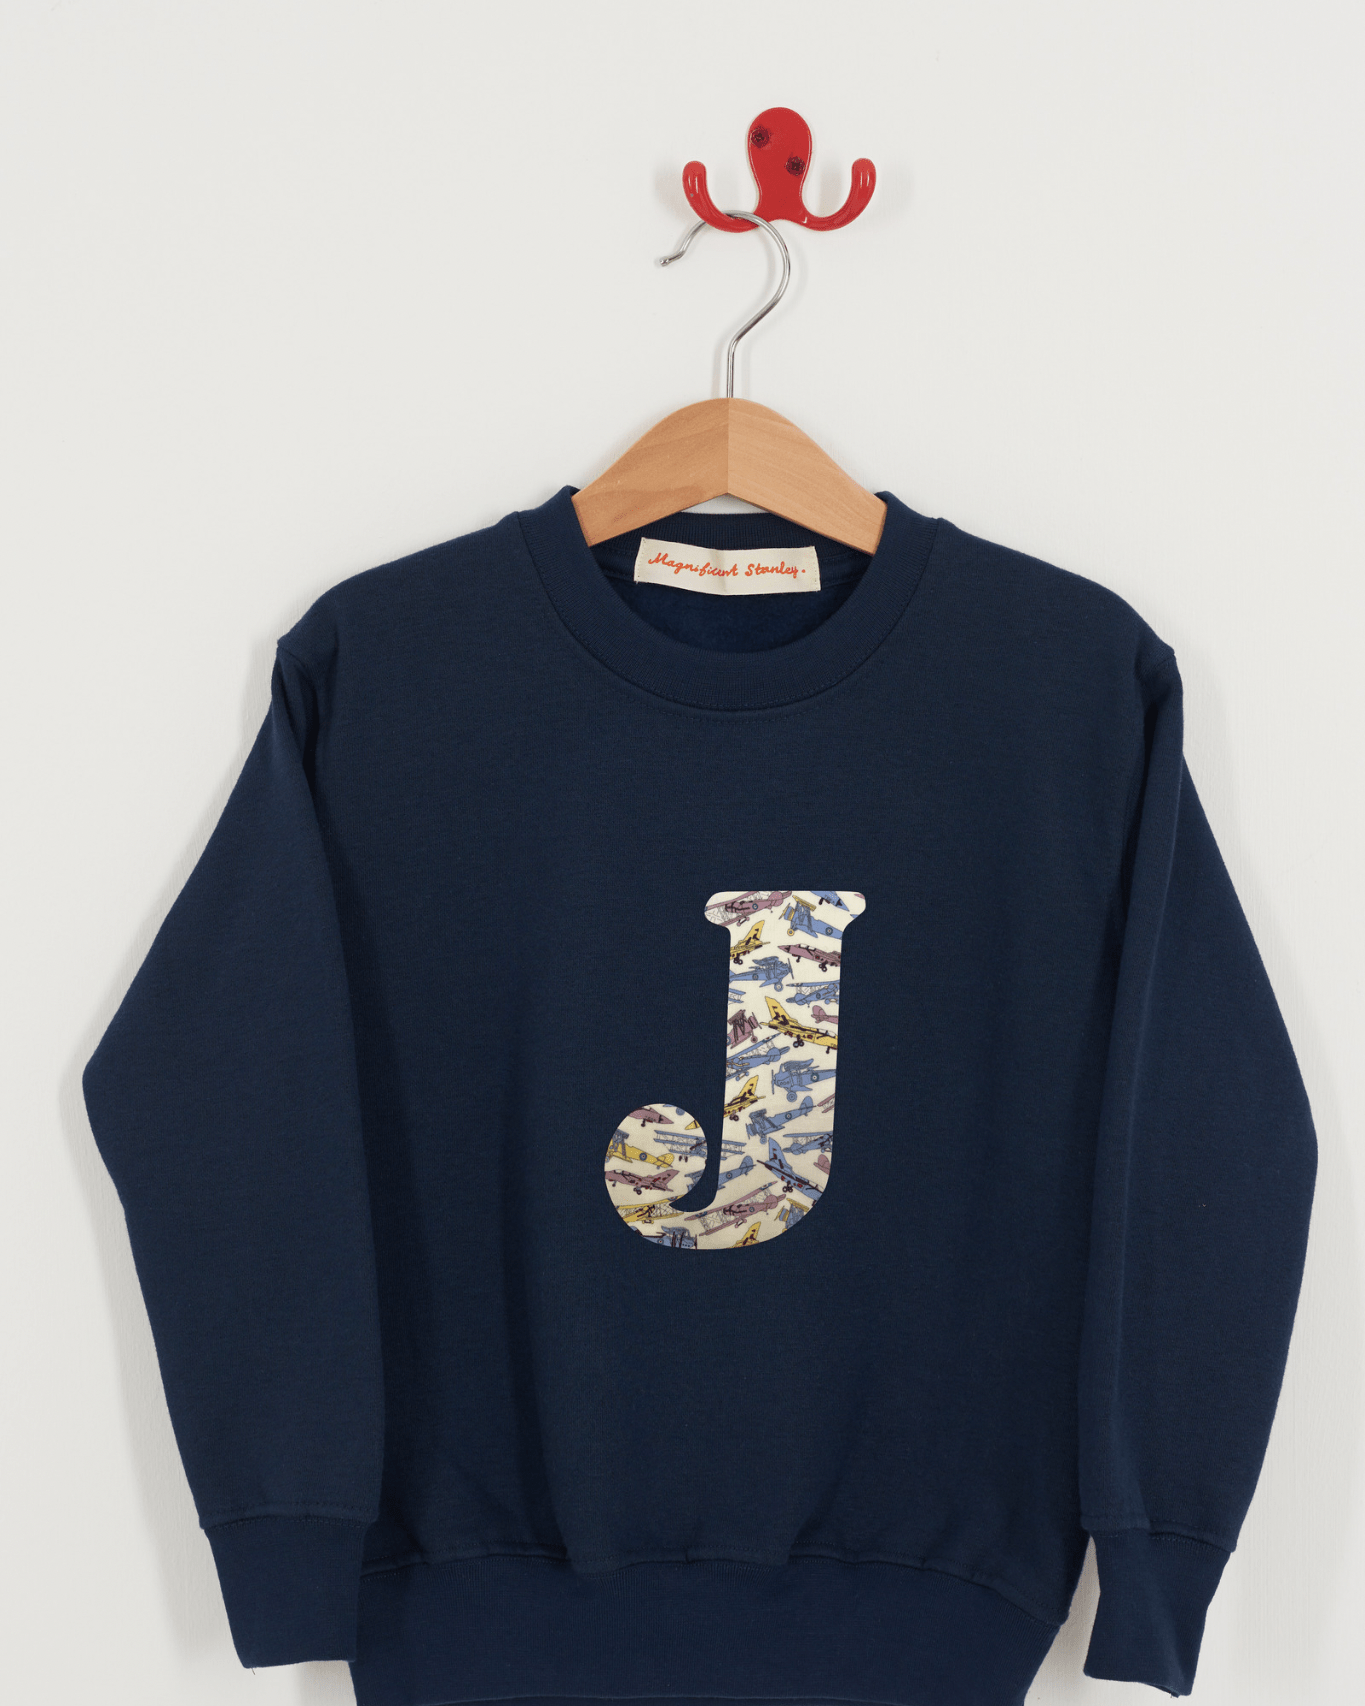 Magnificent Stanley sweatshirt CREATE YOUR OWN Personalised or Age Navy Sweatshirt